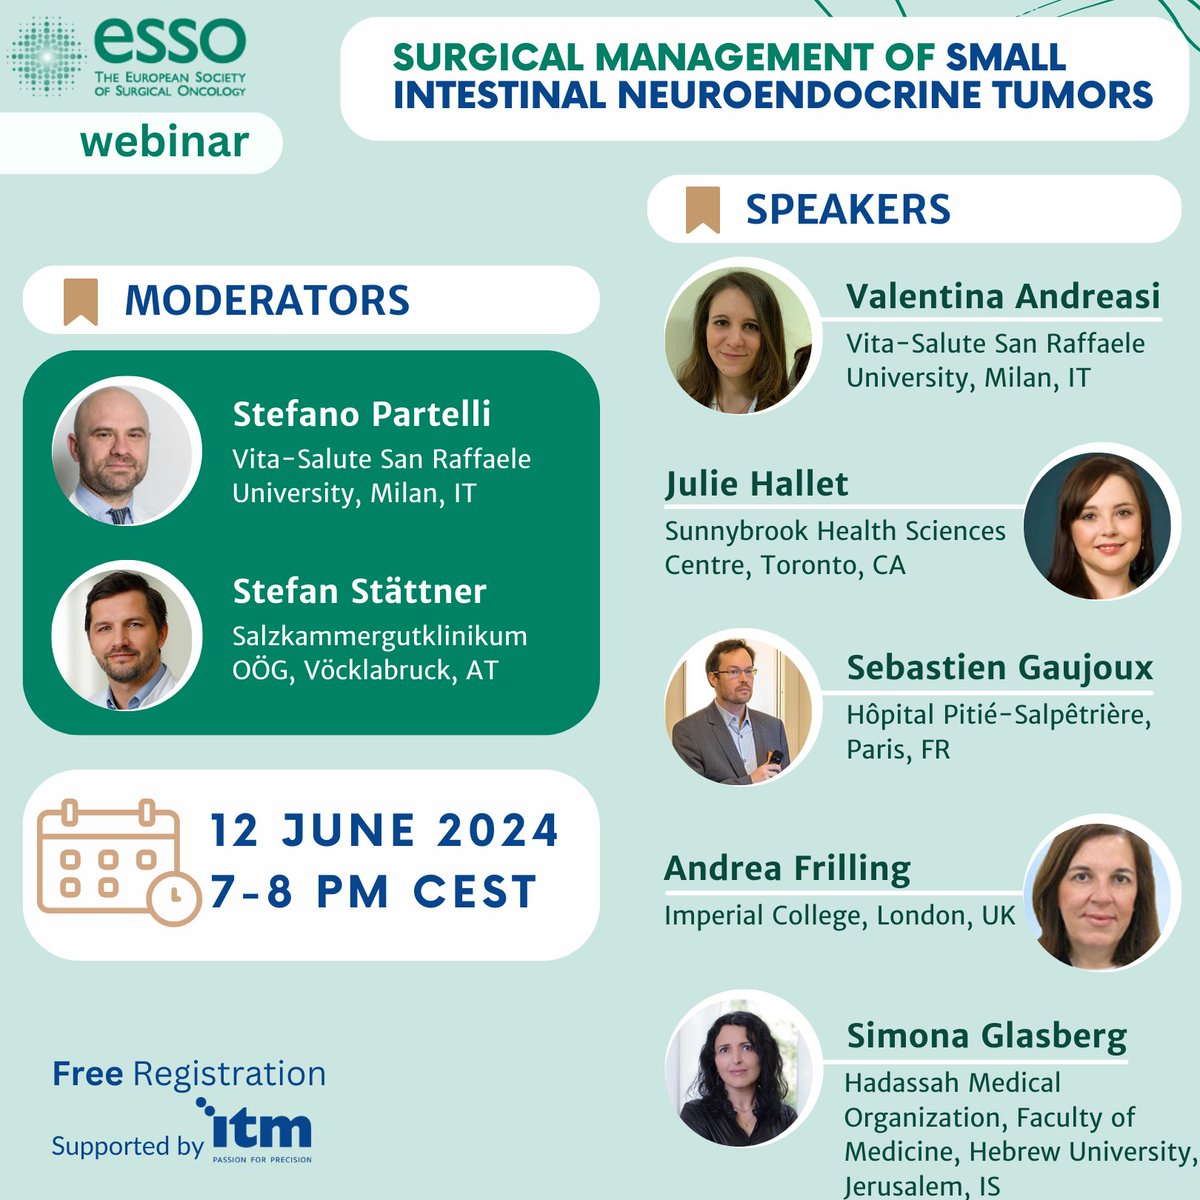 🎯 Save the date! For this 🆓 ESSO Webinar on the #Surgical Management of Small Intestinal #NeuroendocrineTumors All info 👉 essoweb.org/courses/esso-w… @EYSAC1 @SStattner @spartelli @HalletJulie @simonag56739514